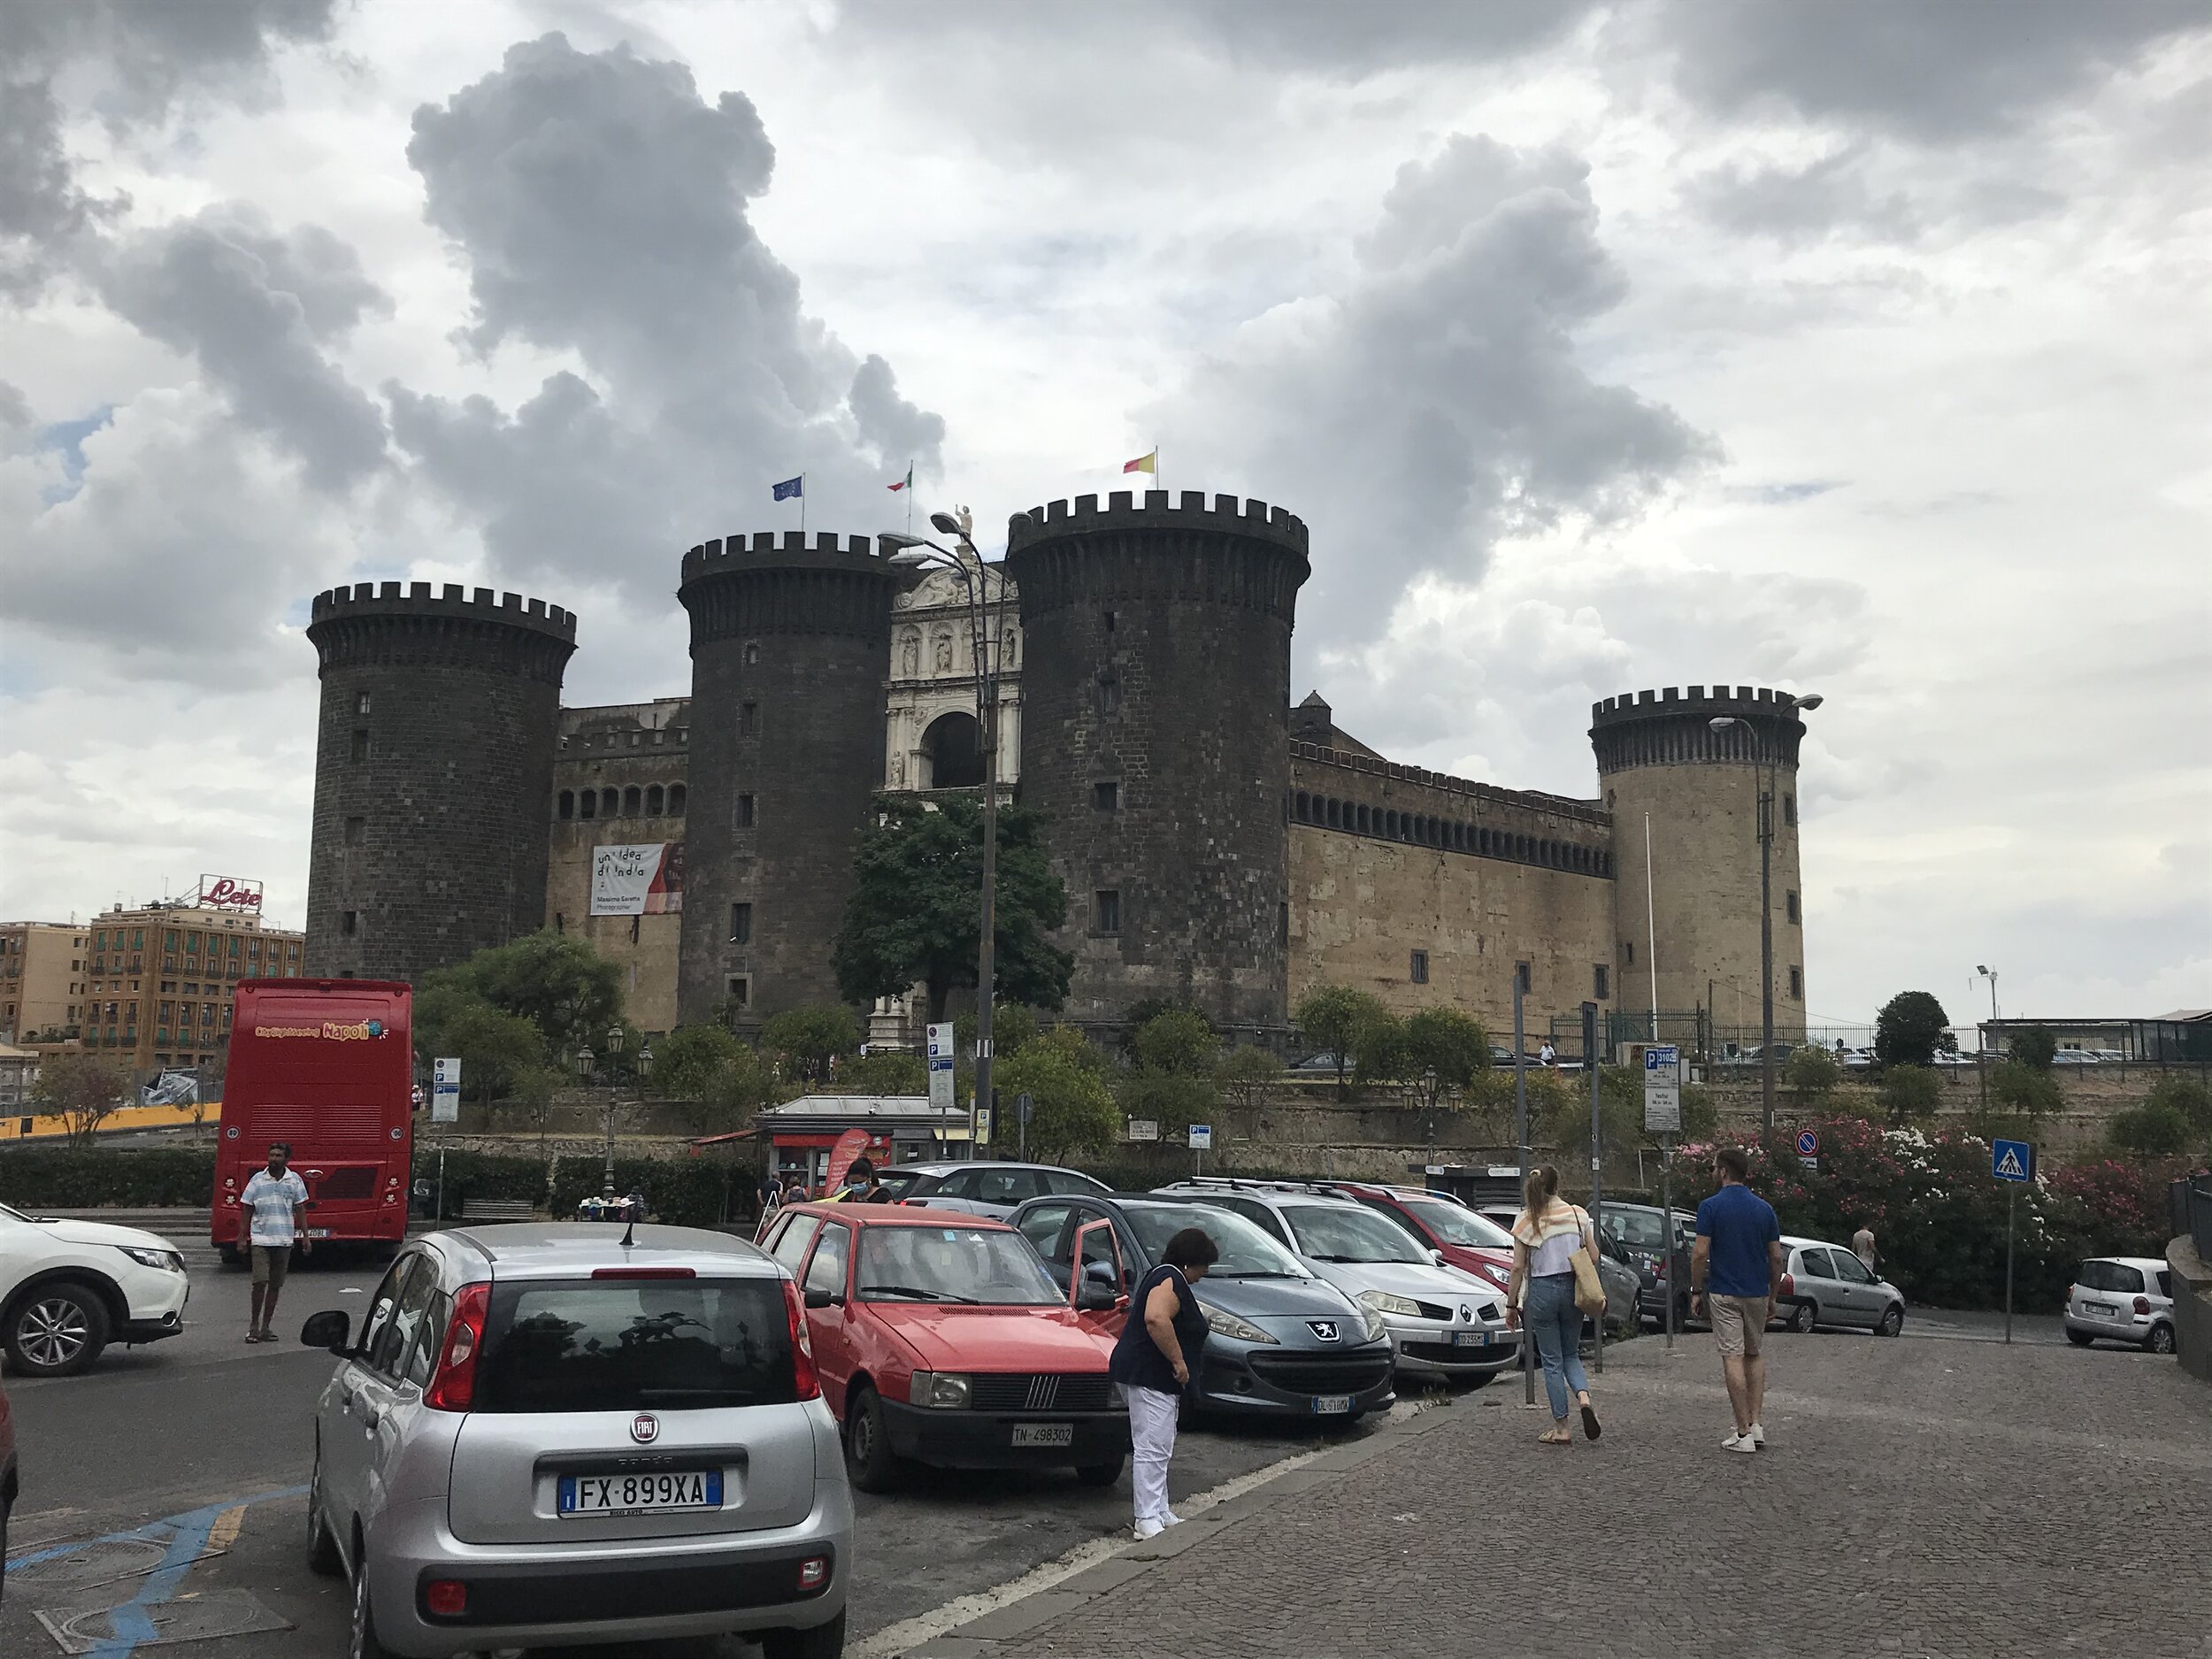   NAPLES, Italy. August 7th, 2020.  Castel Nuovo, the massive sea fortress, was surrounded with construction work on the new Metro line.  